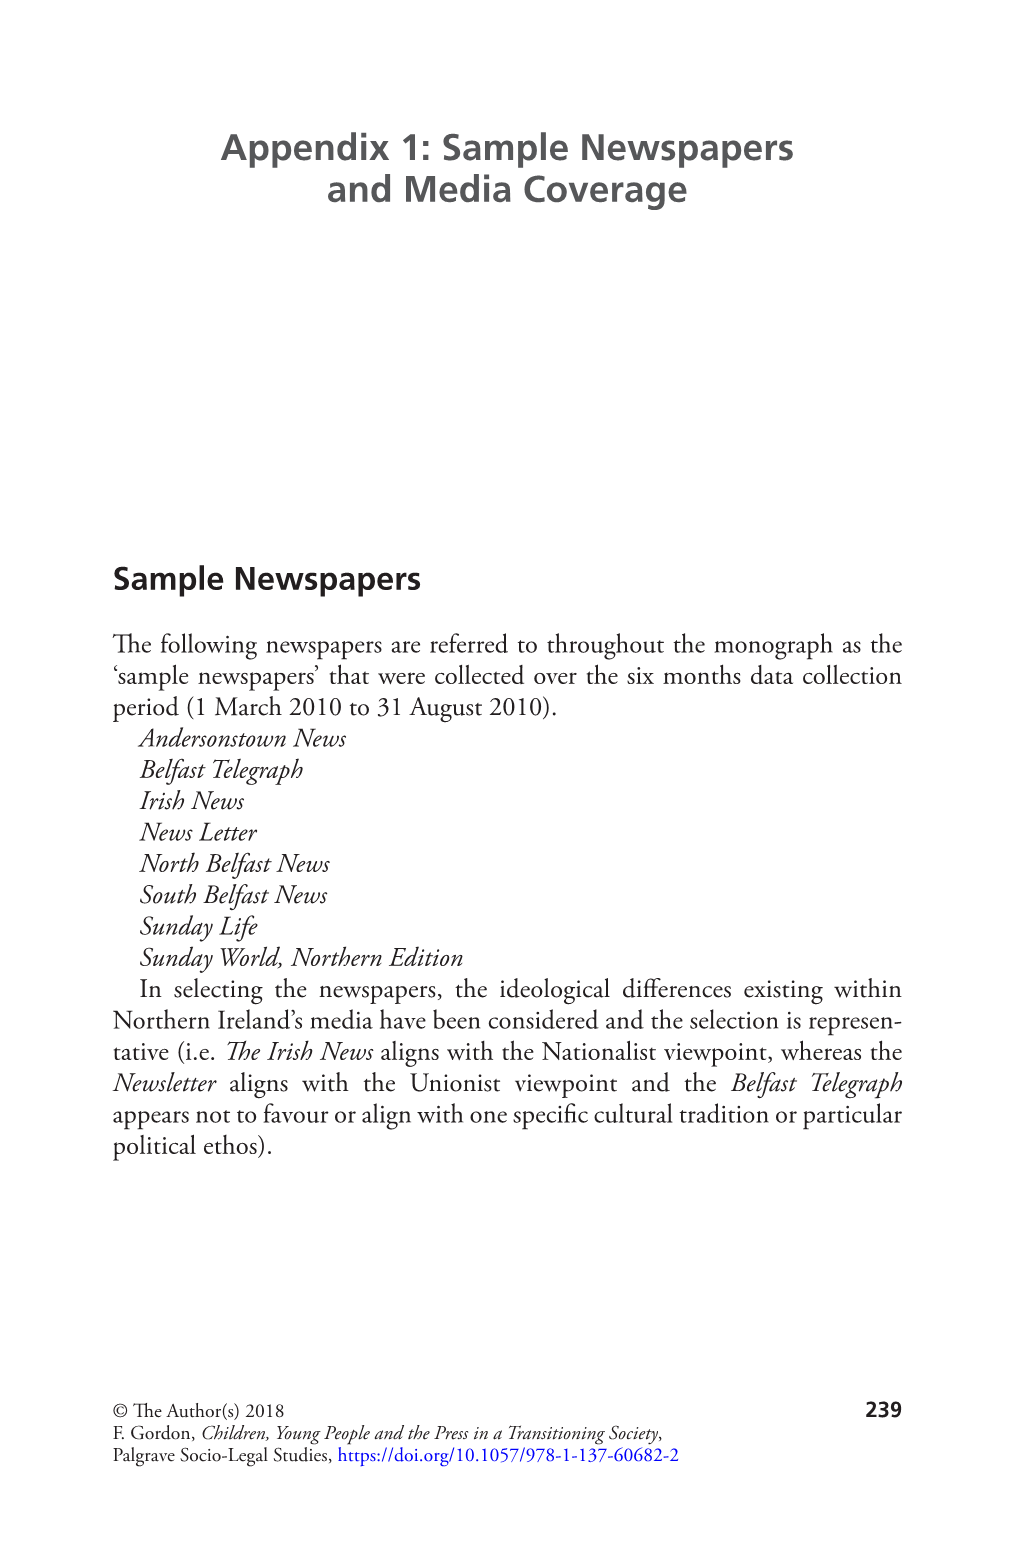 Appendix 1: Sample Newspapers and Media Coverage